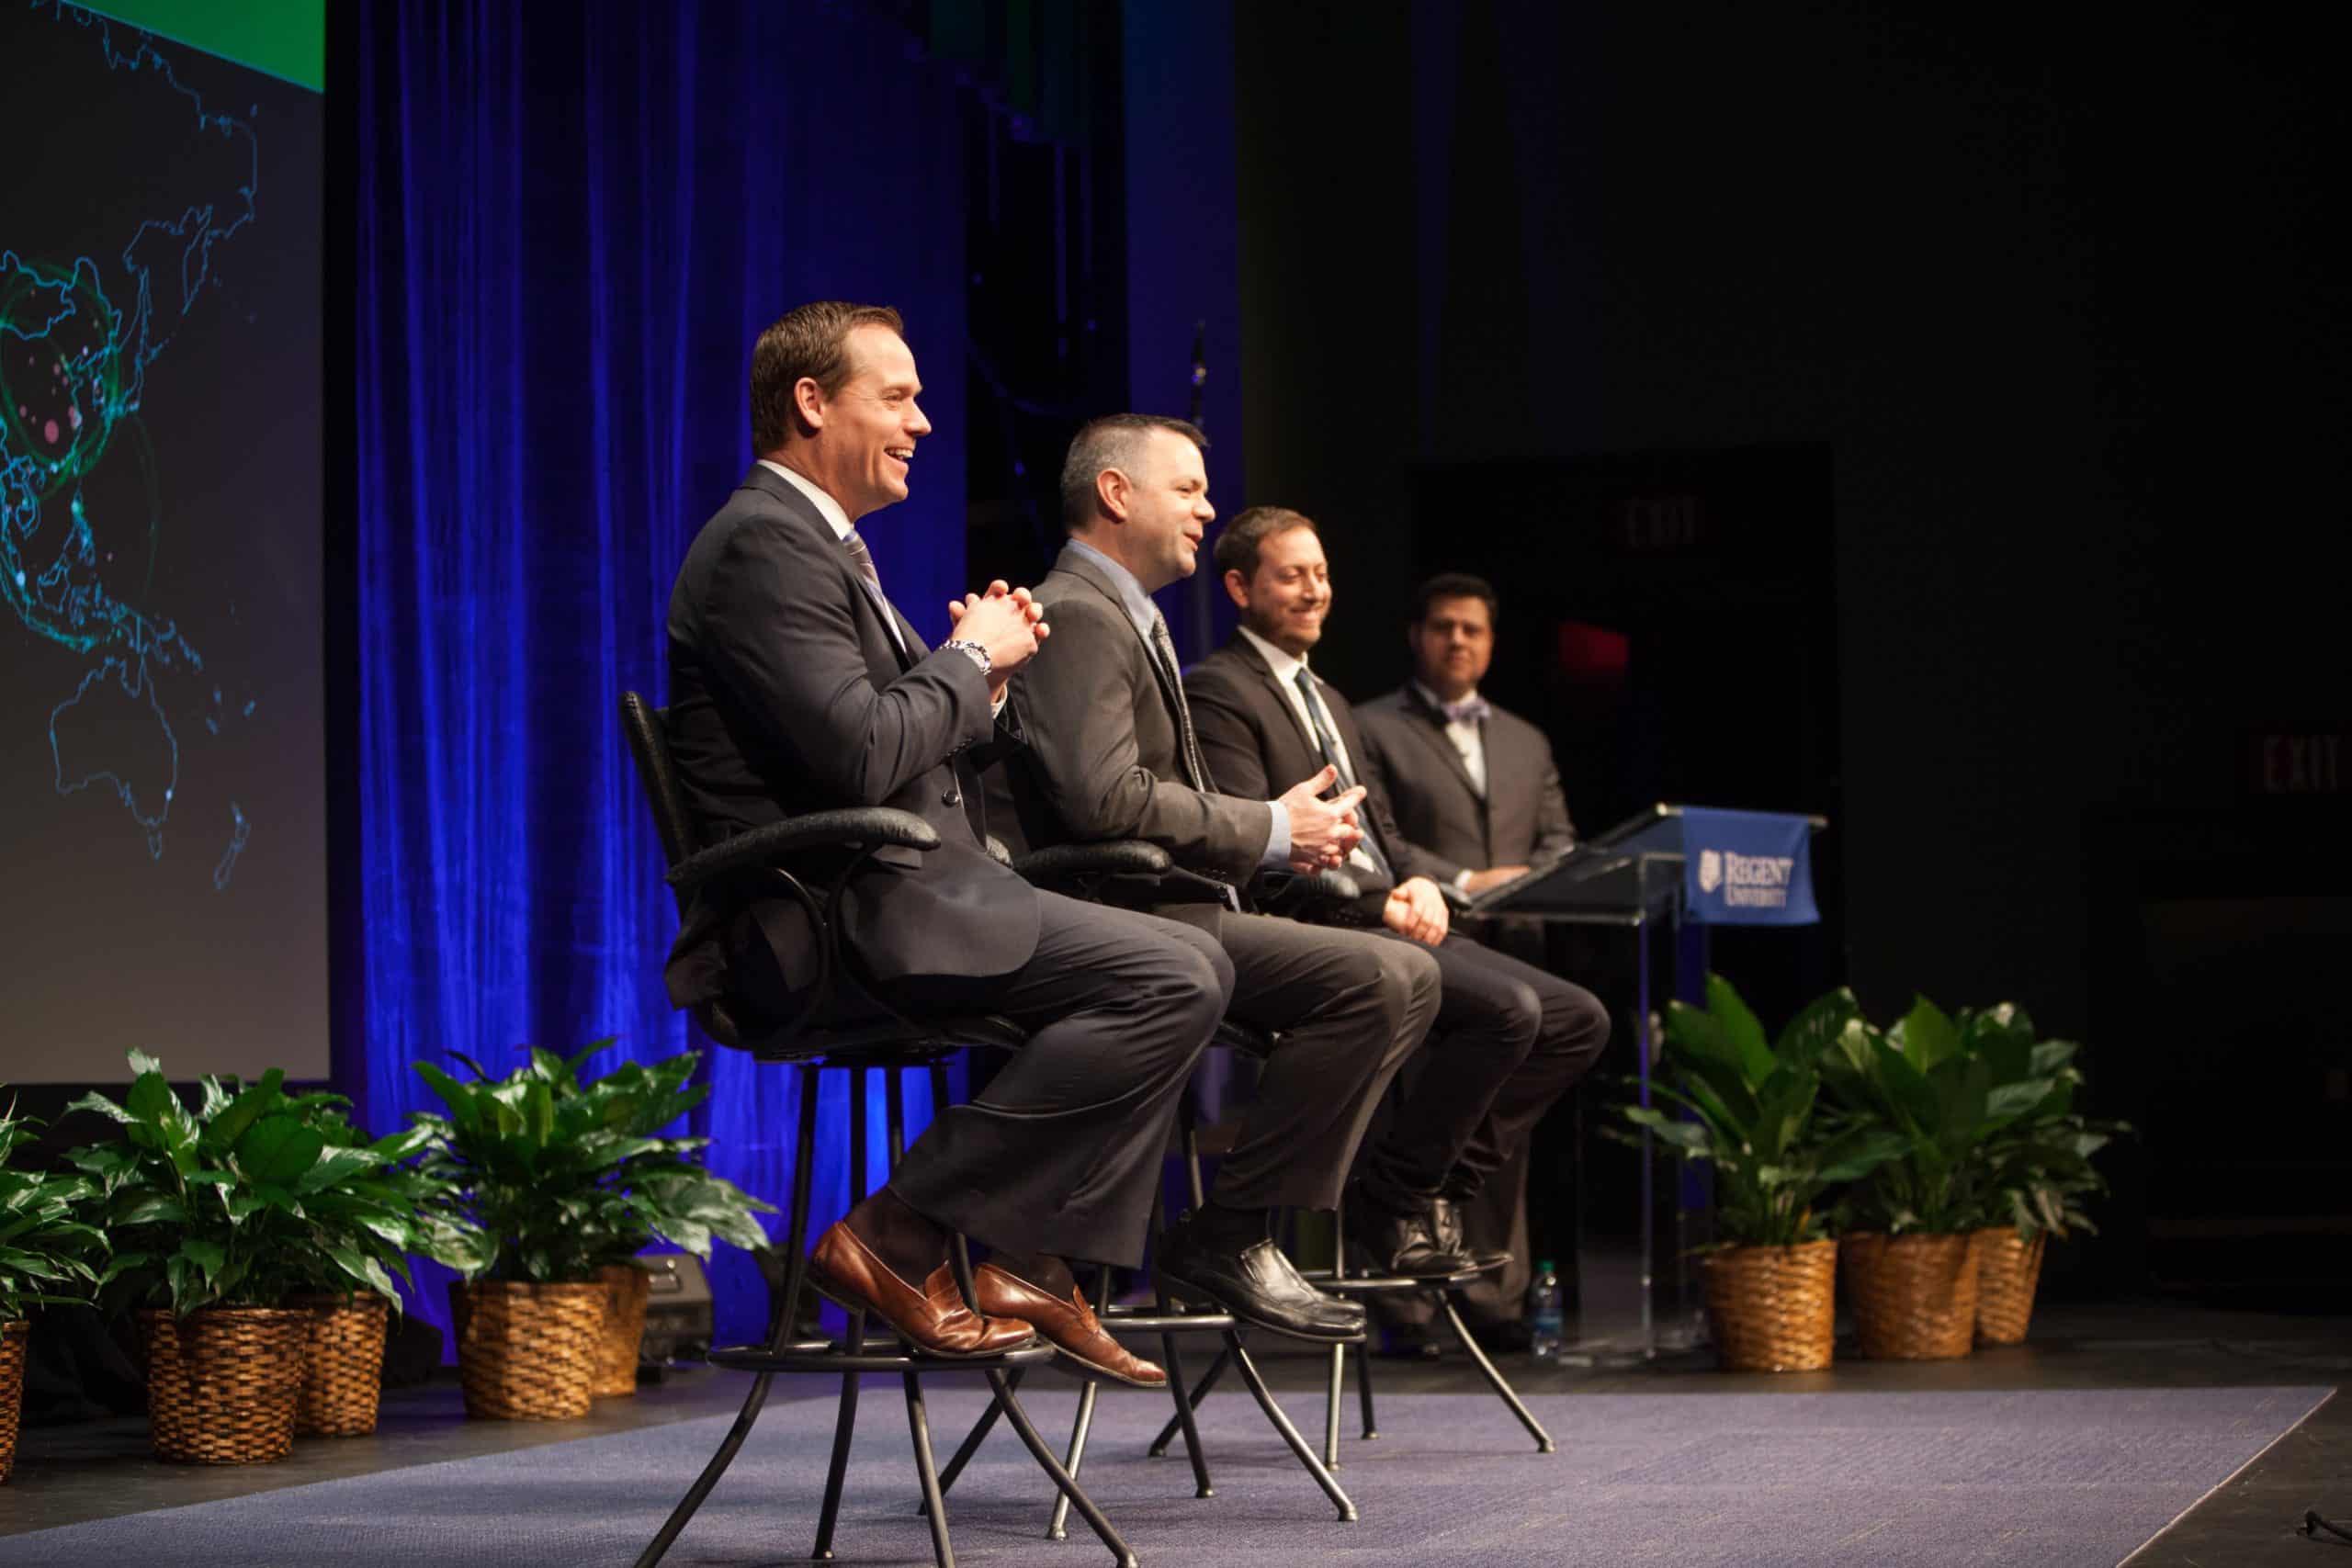 Regent University’s inaugural Cybersecurity Summit generated a wide-ranging discussion. Photo courtesy of Eric Lusher.